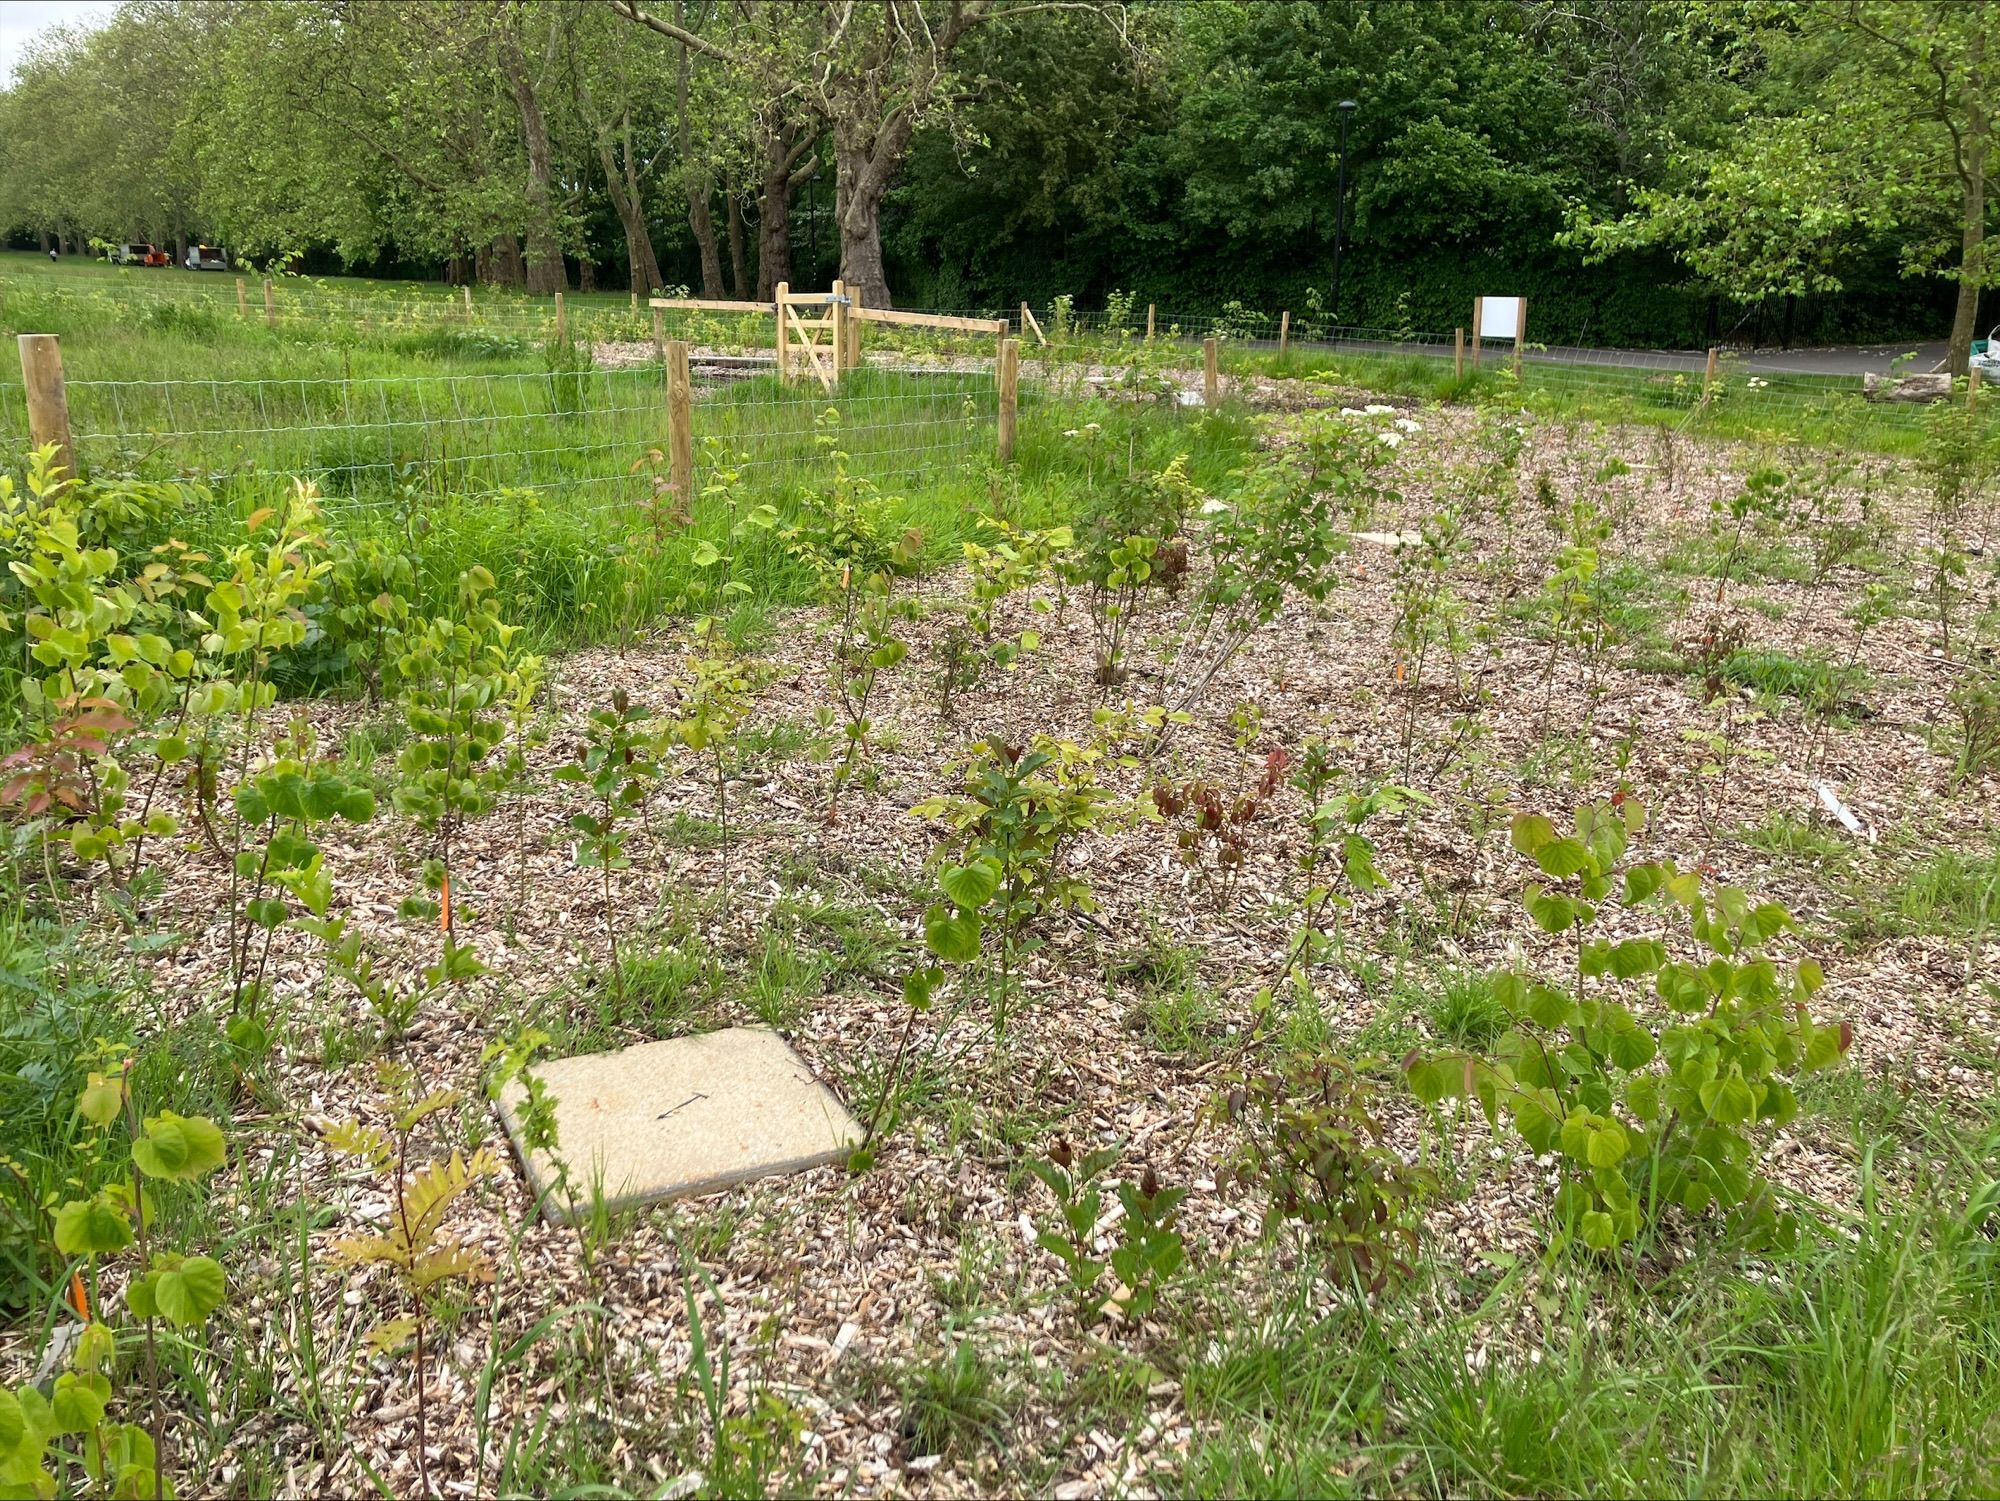 Peckham Rye Park and Common Tiny Forest. June 23 - Photo Credit Southwark Council